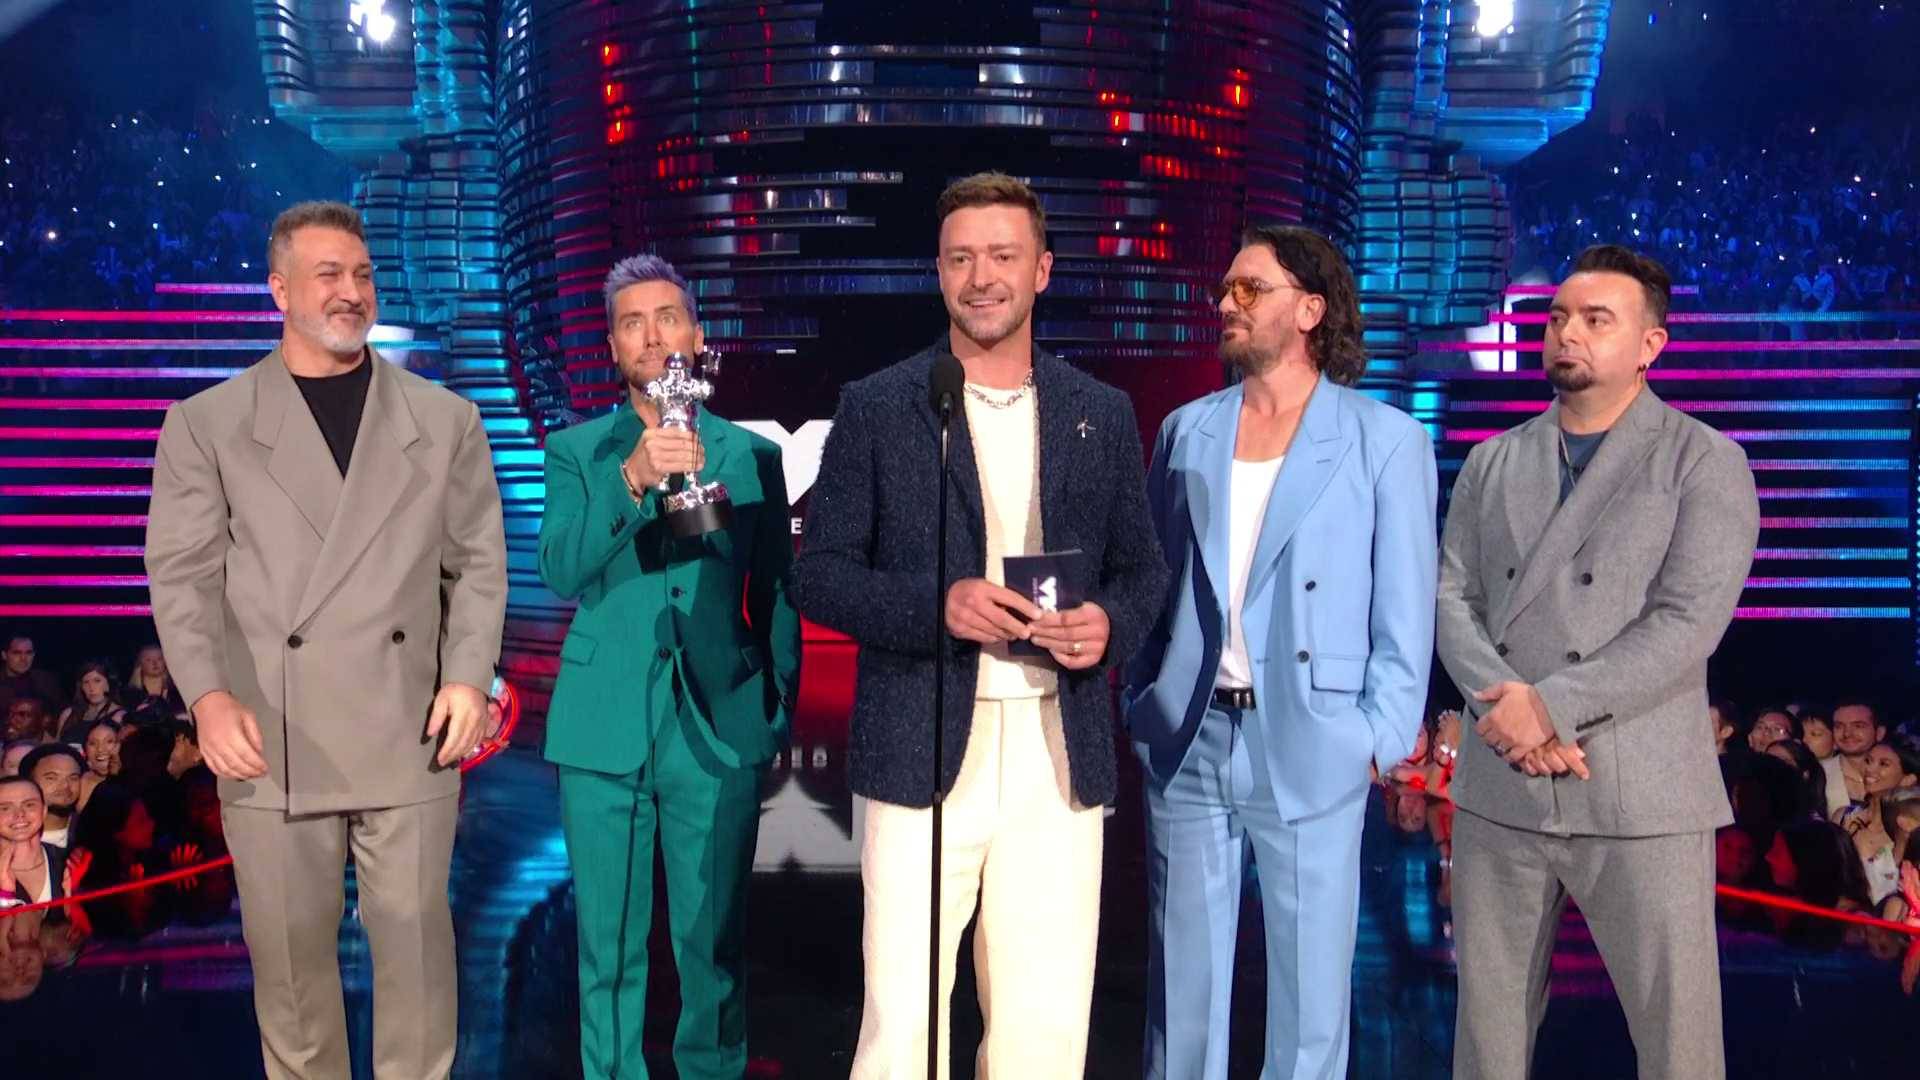 The members of *NSYNC take the MTV VMAs 2023 stage to present the award for Best Pop to Taylor Swift for her song "Anti-Hero."